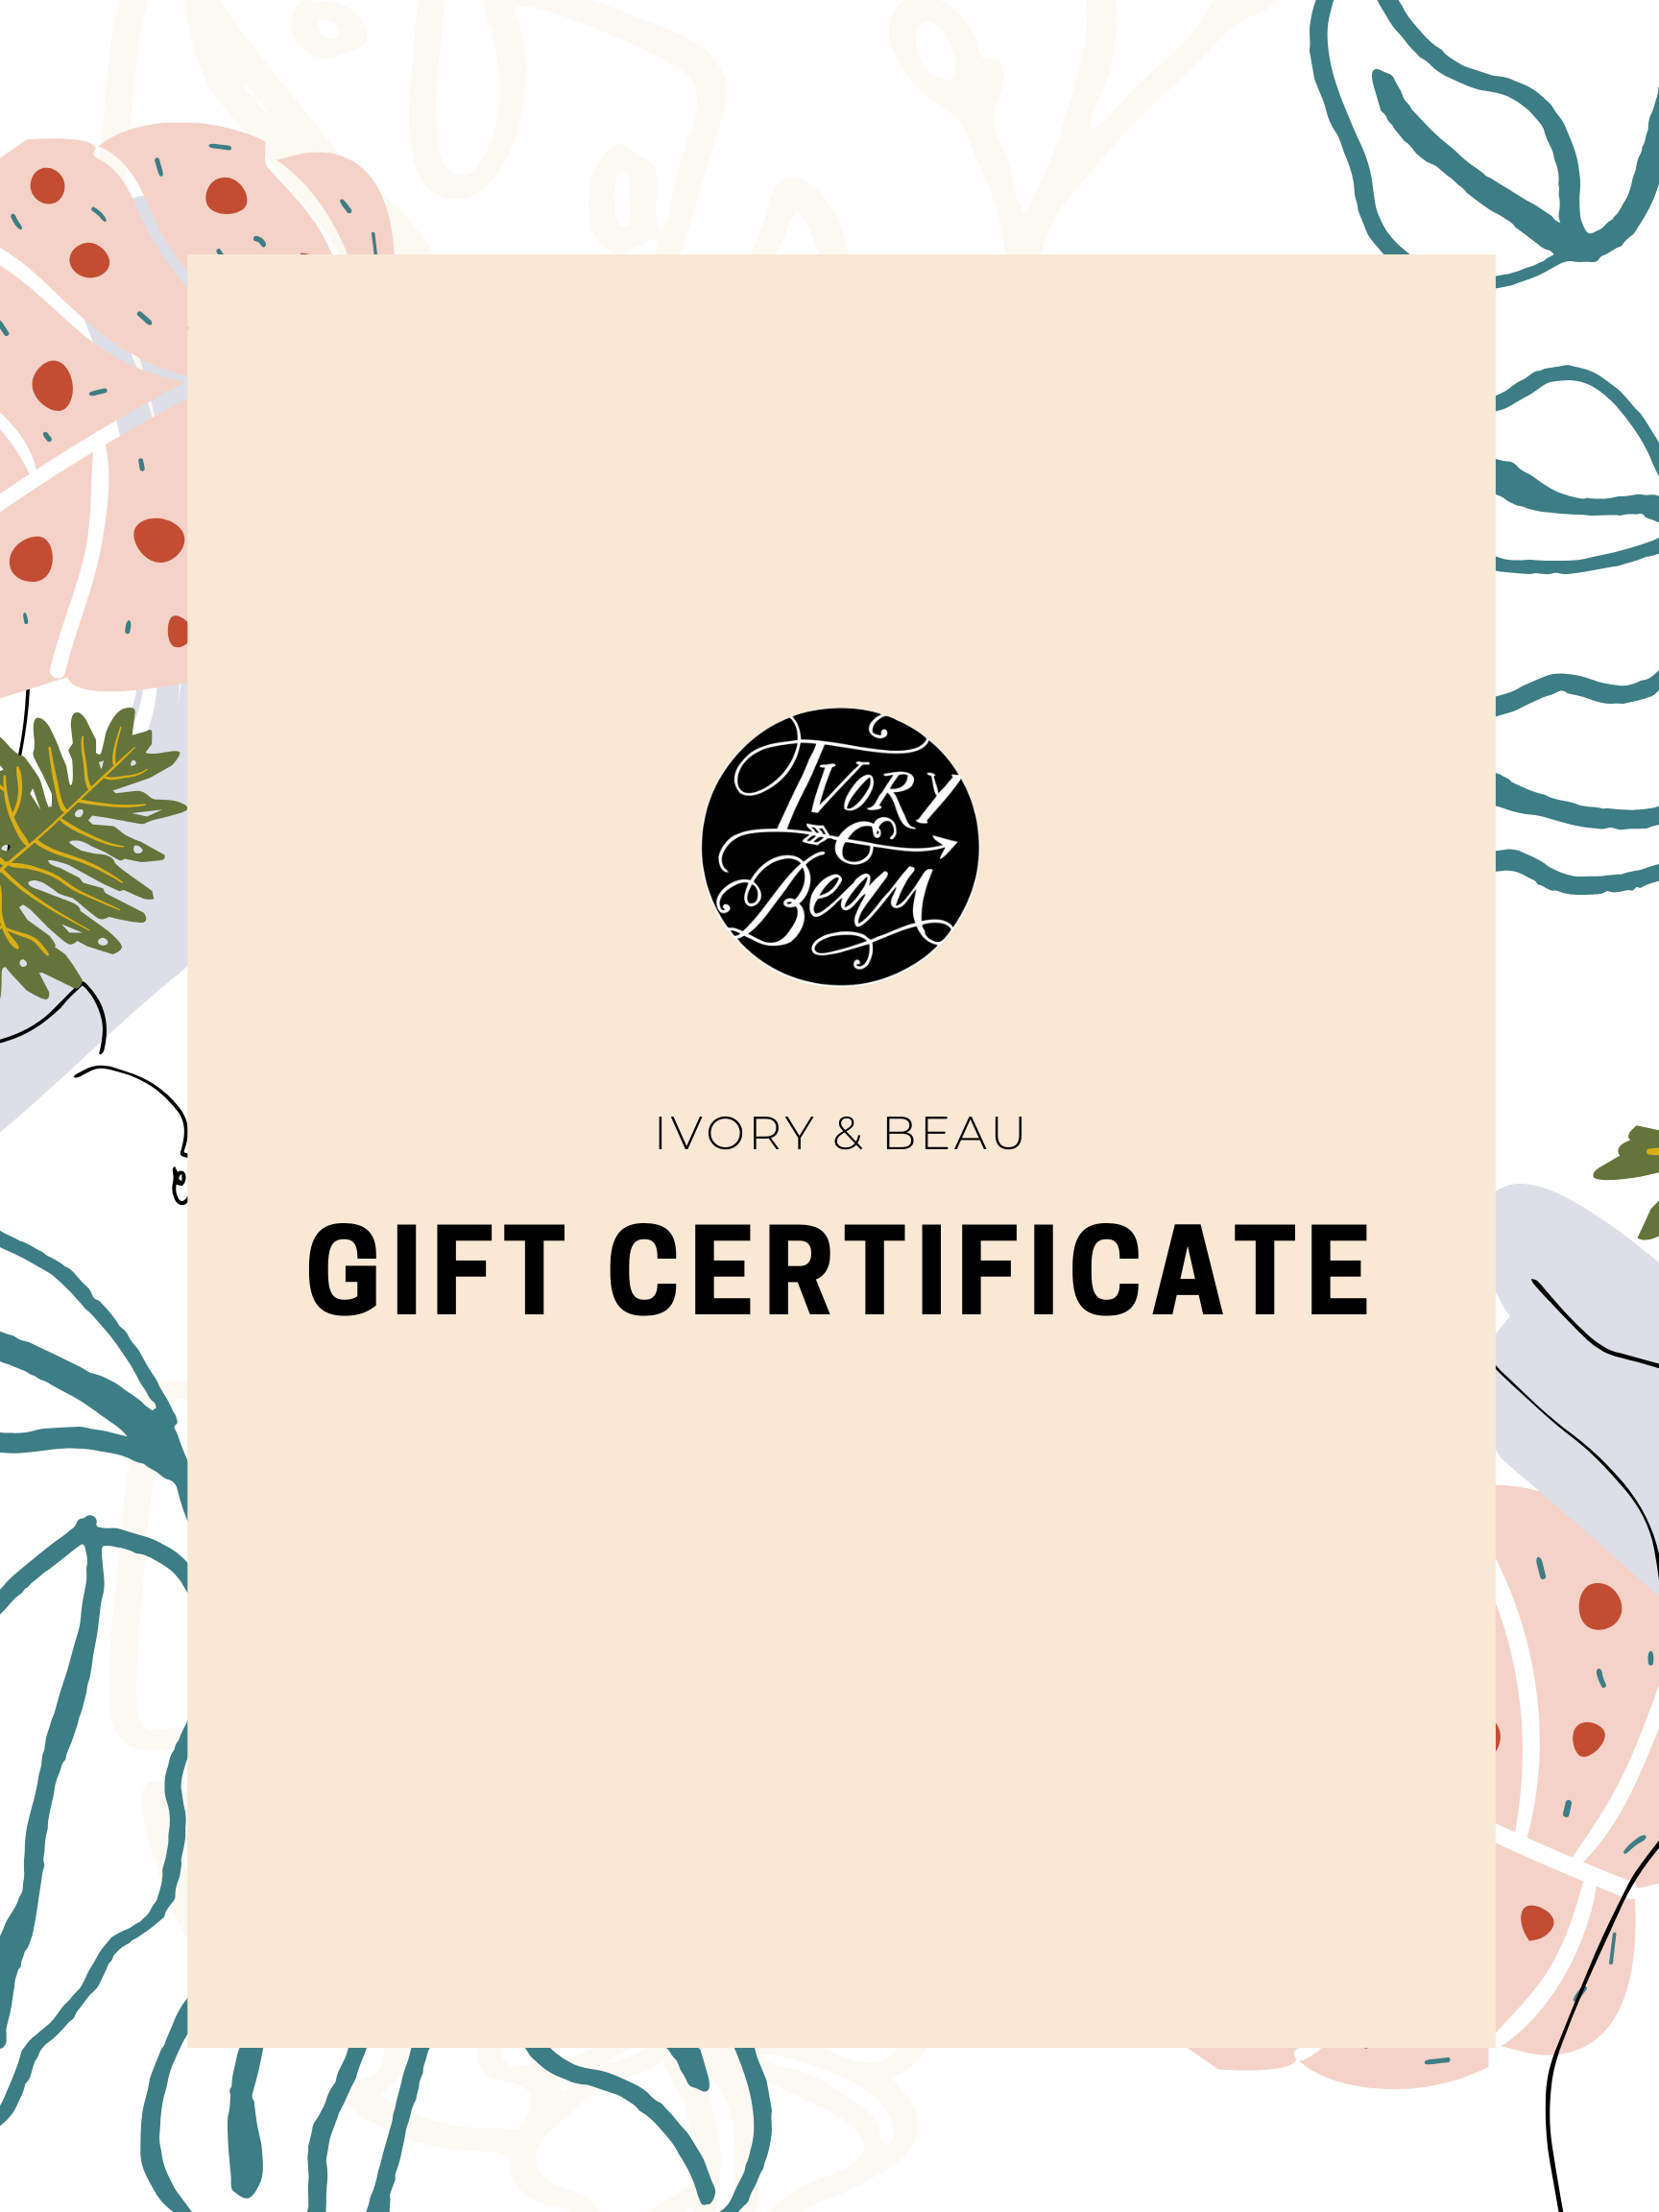 ivory-and-beau-blog-gift-cards-gift-certificate-savannah-bridal-boutique-savannah-wedding-planner-1.png